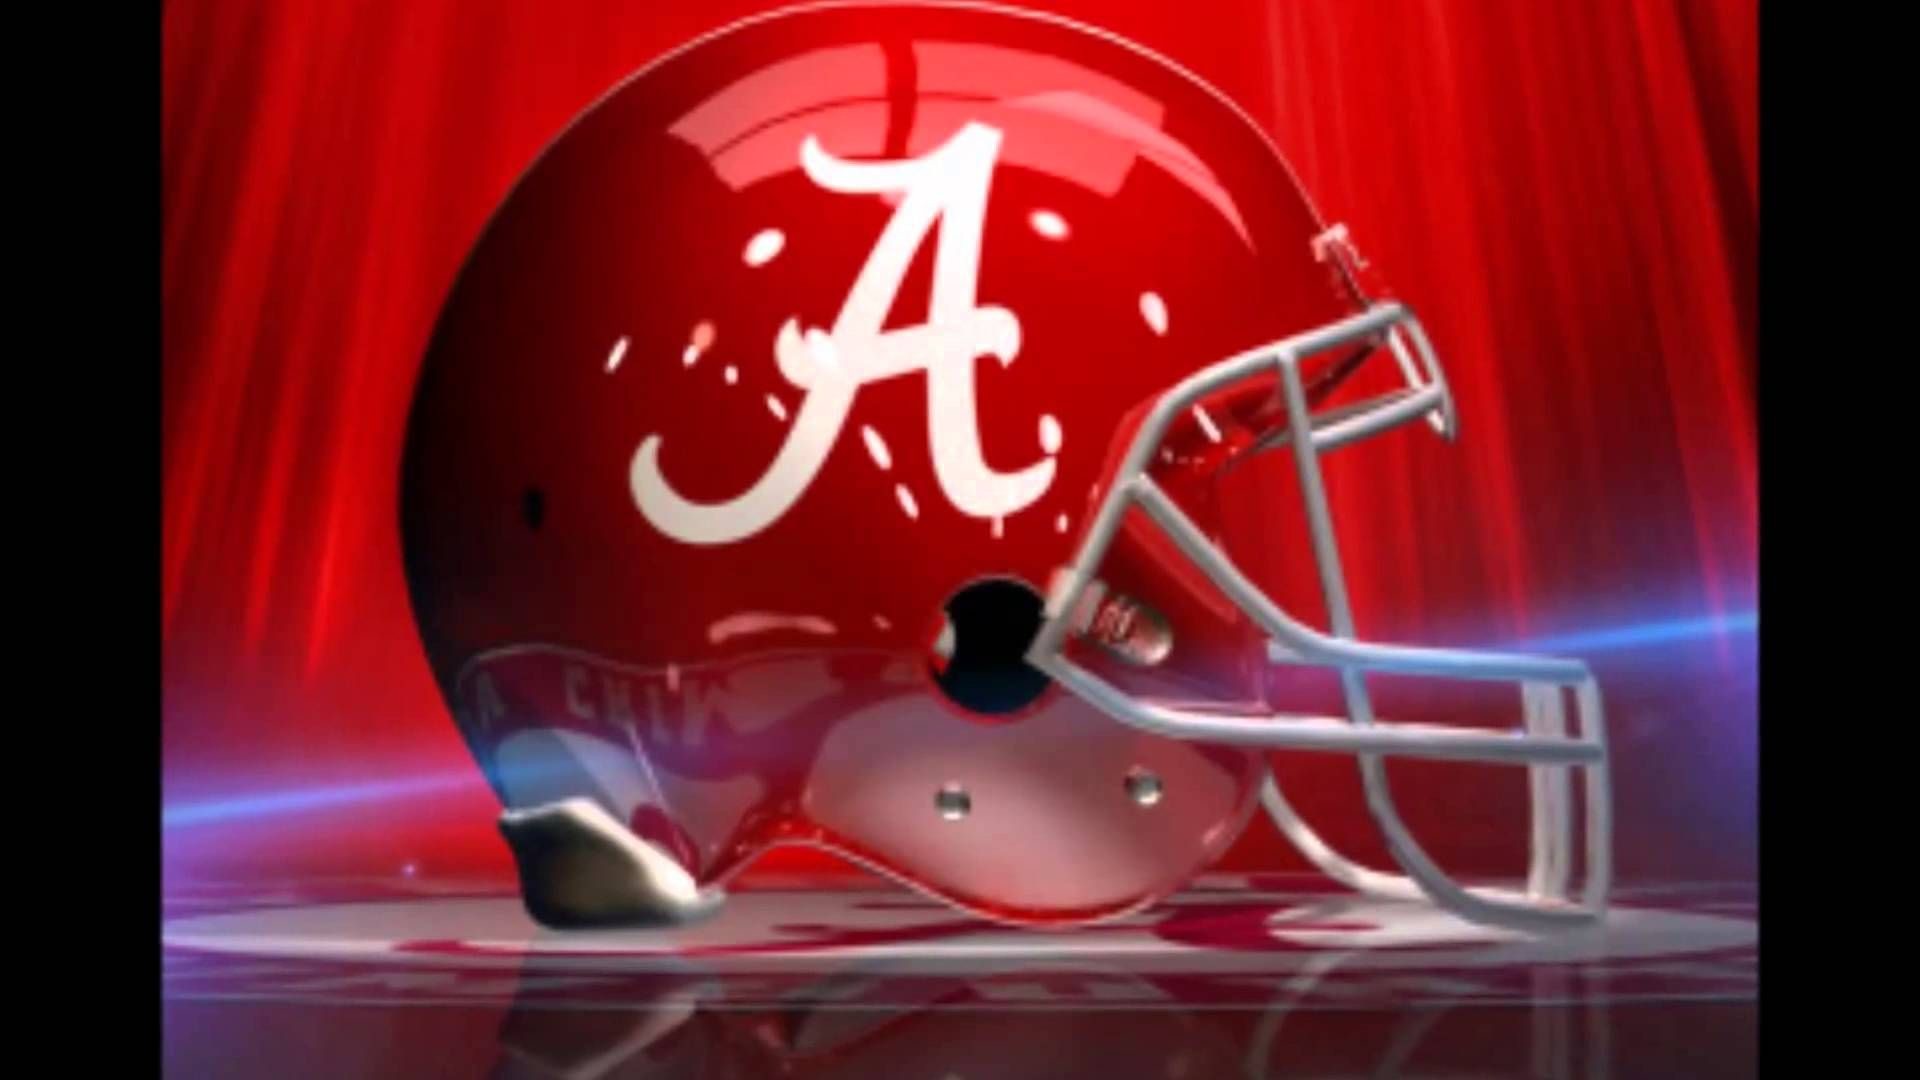 1920x1080 Alabama Football Wallpaper for PC – Full HD Pictures for PC & Mac, Tablet,